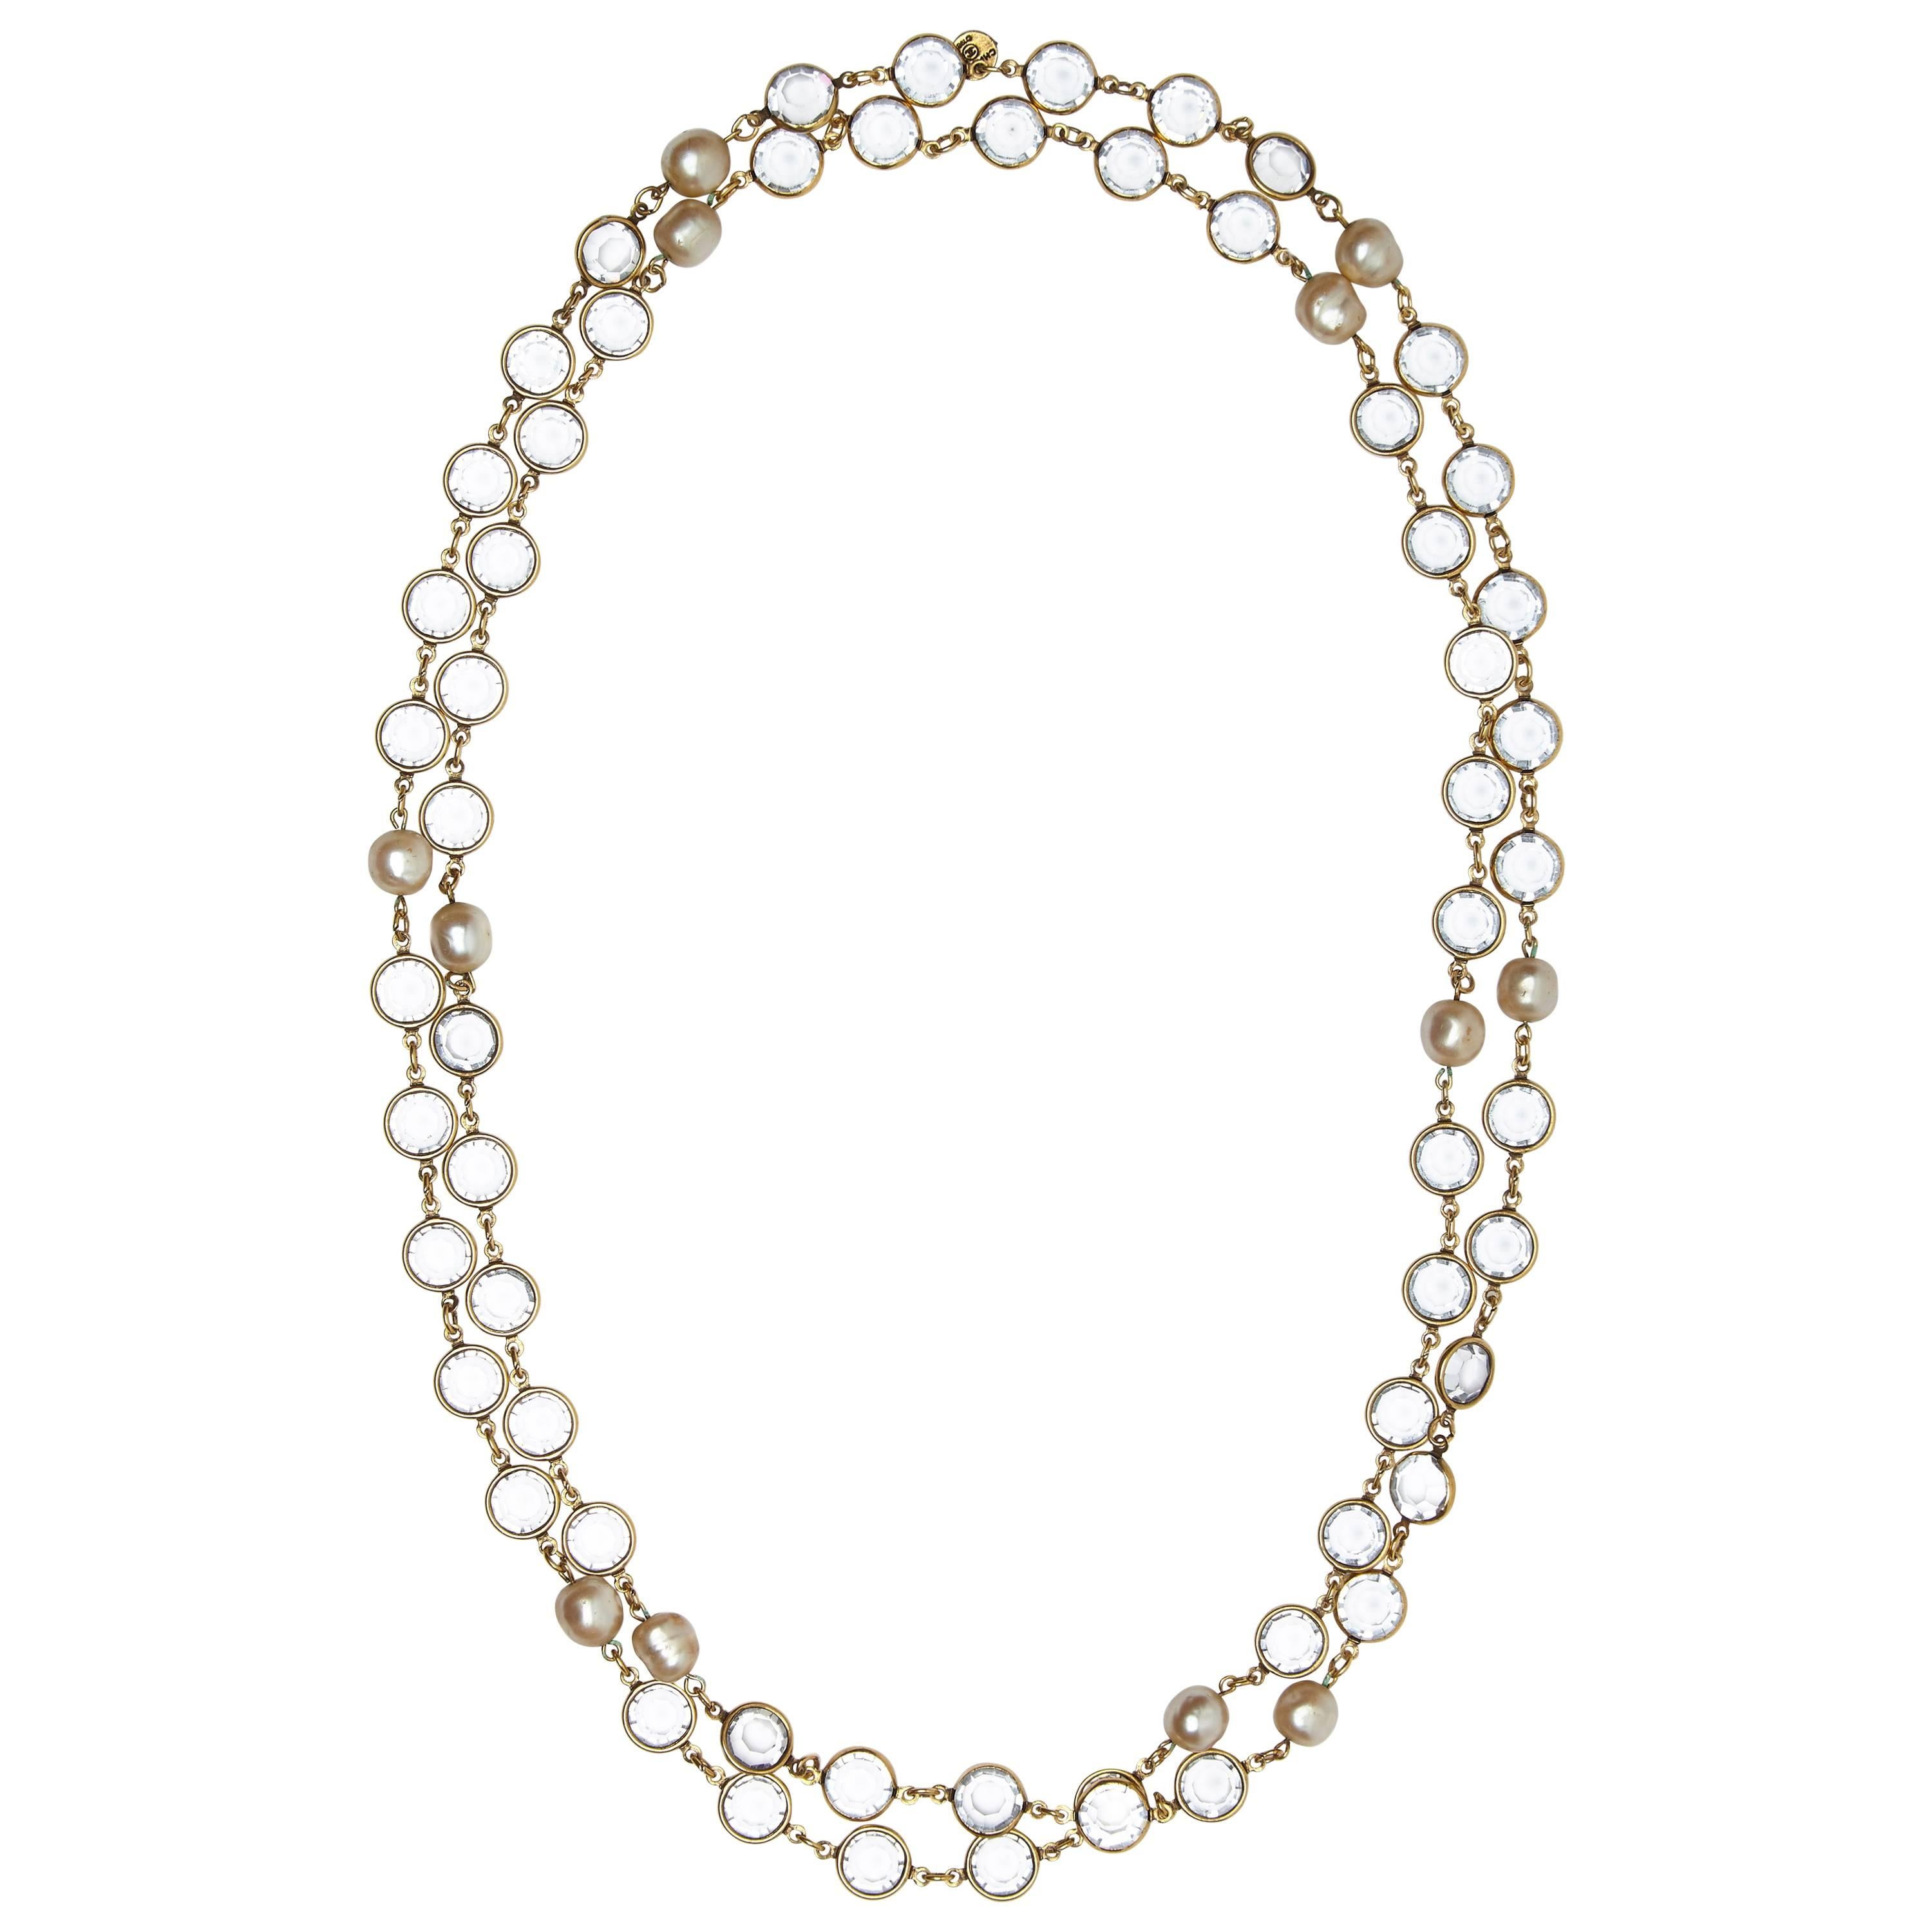 1981 Chanel Long Sautoir Vintage Crystal and Faux Baroque Pearl Necklace